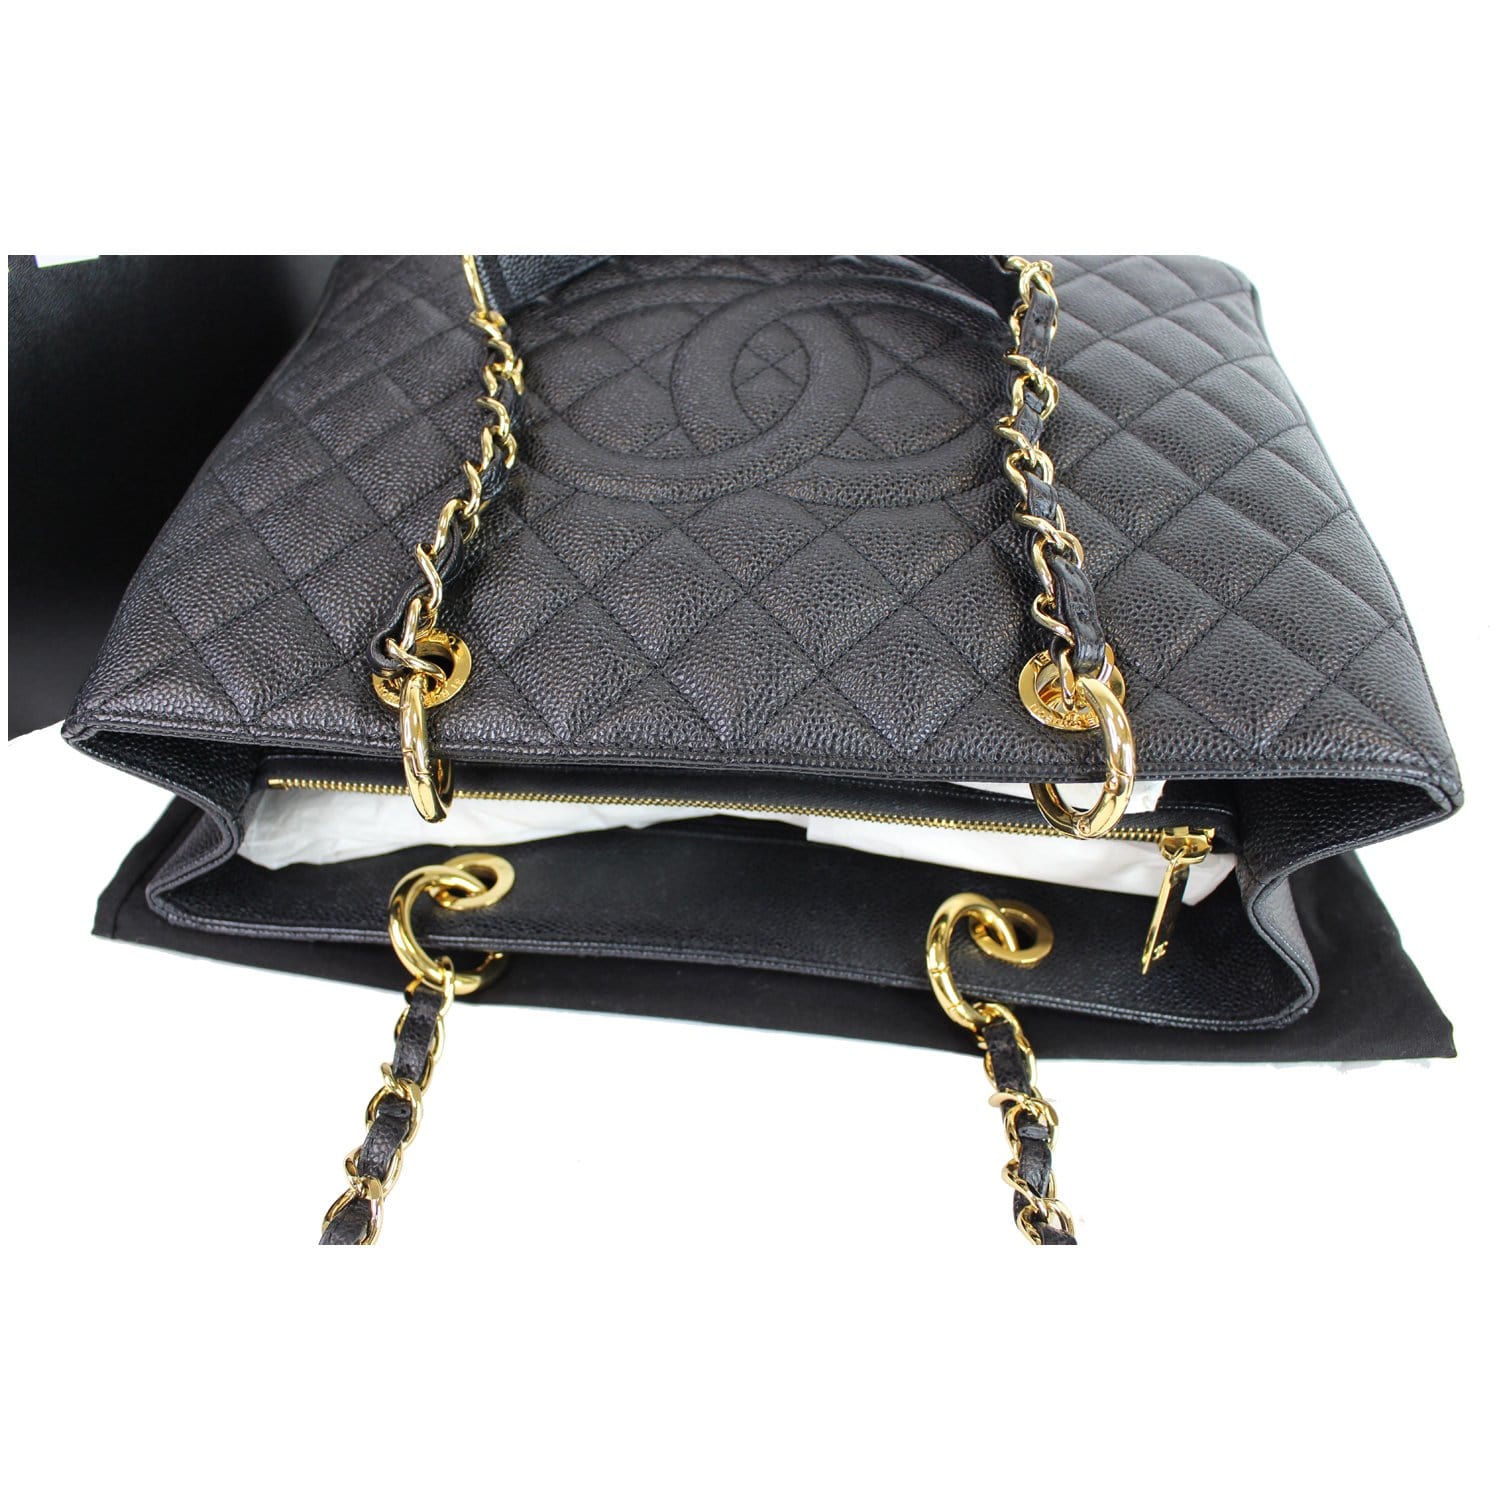 CHANEL black Caviar Leather gold hw GST Grand Shopping Tote Bag